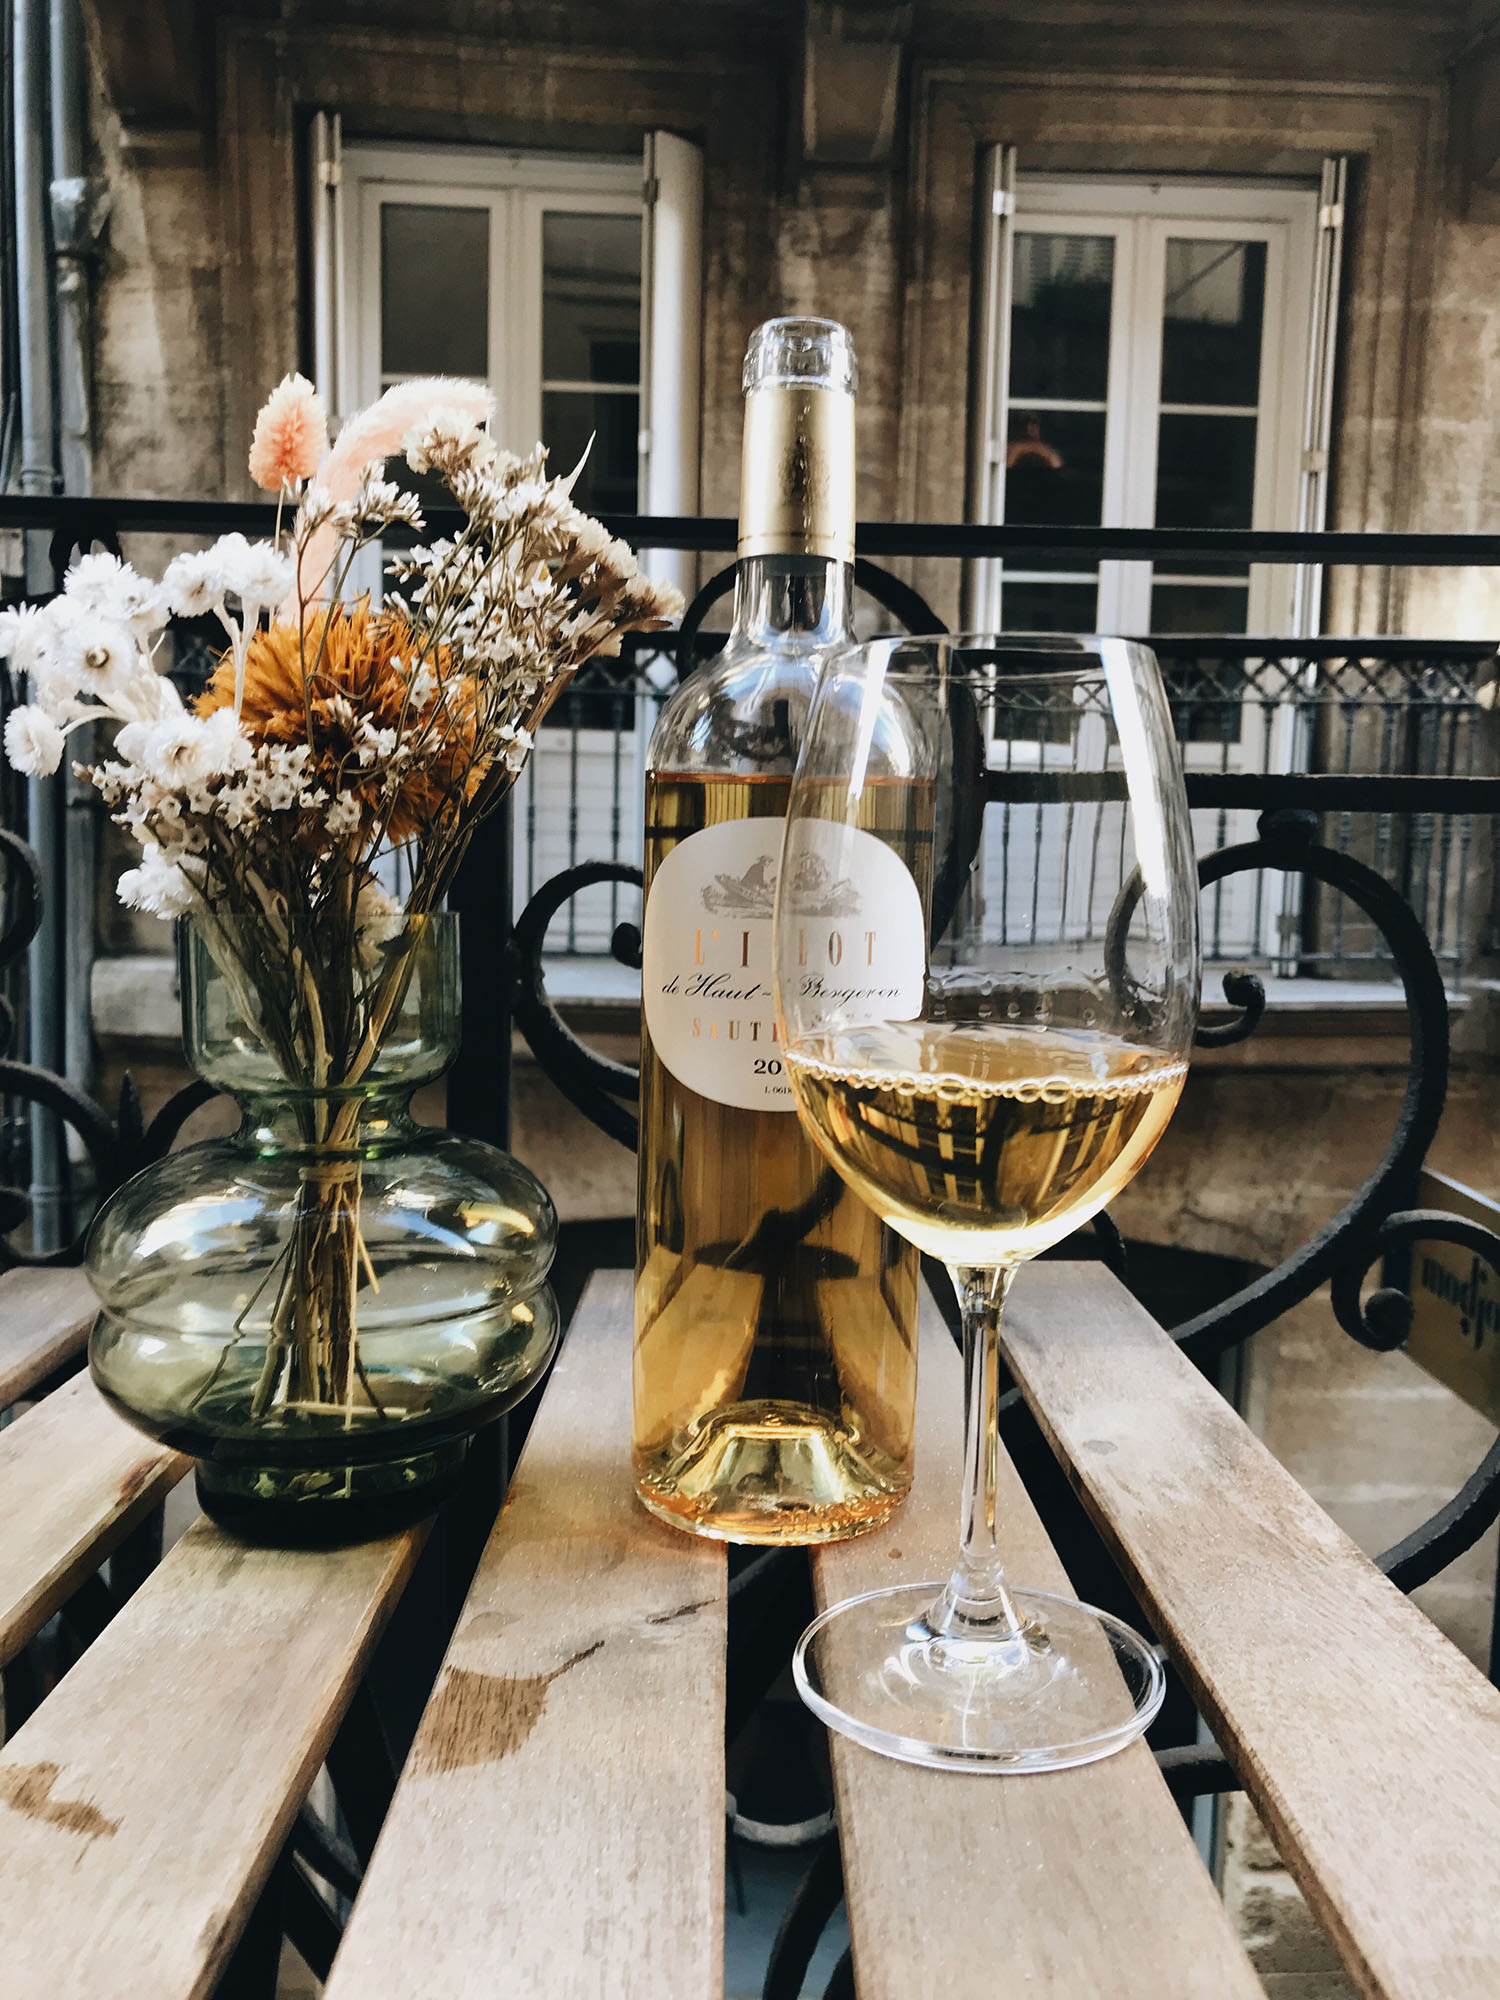 A bottle and glass of white wine on a balcony table at La Maison Fernand in Bordeaux, France, as captured by top Canadian travel blogger Cee Fardoe of Coco & Vera